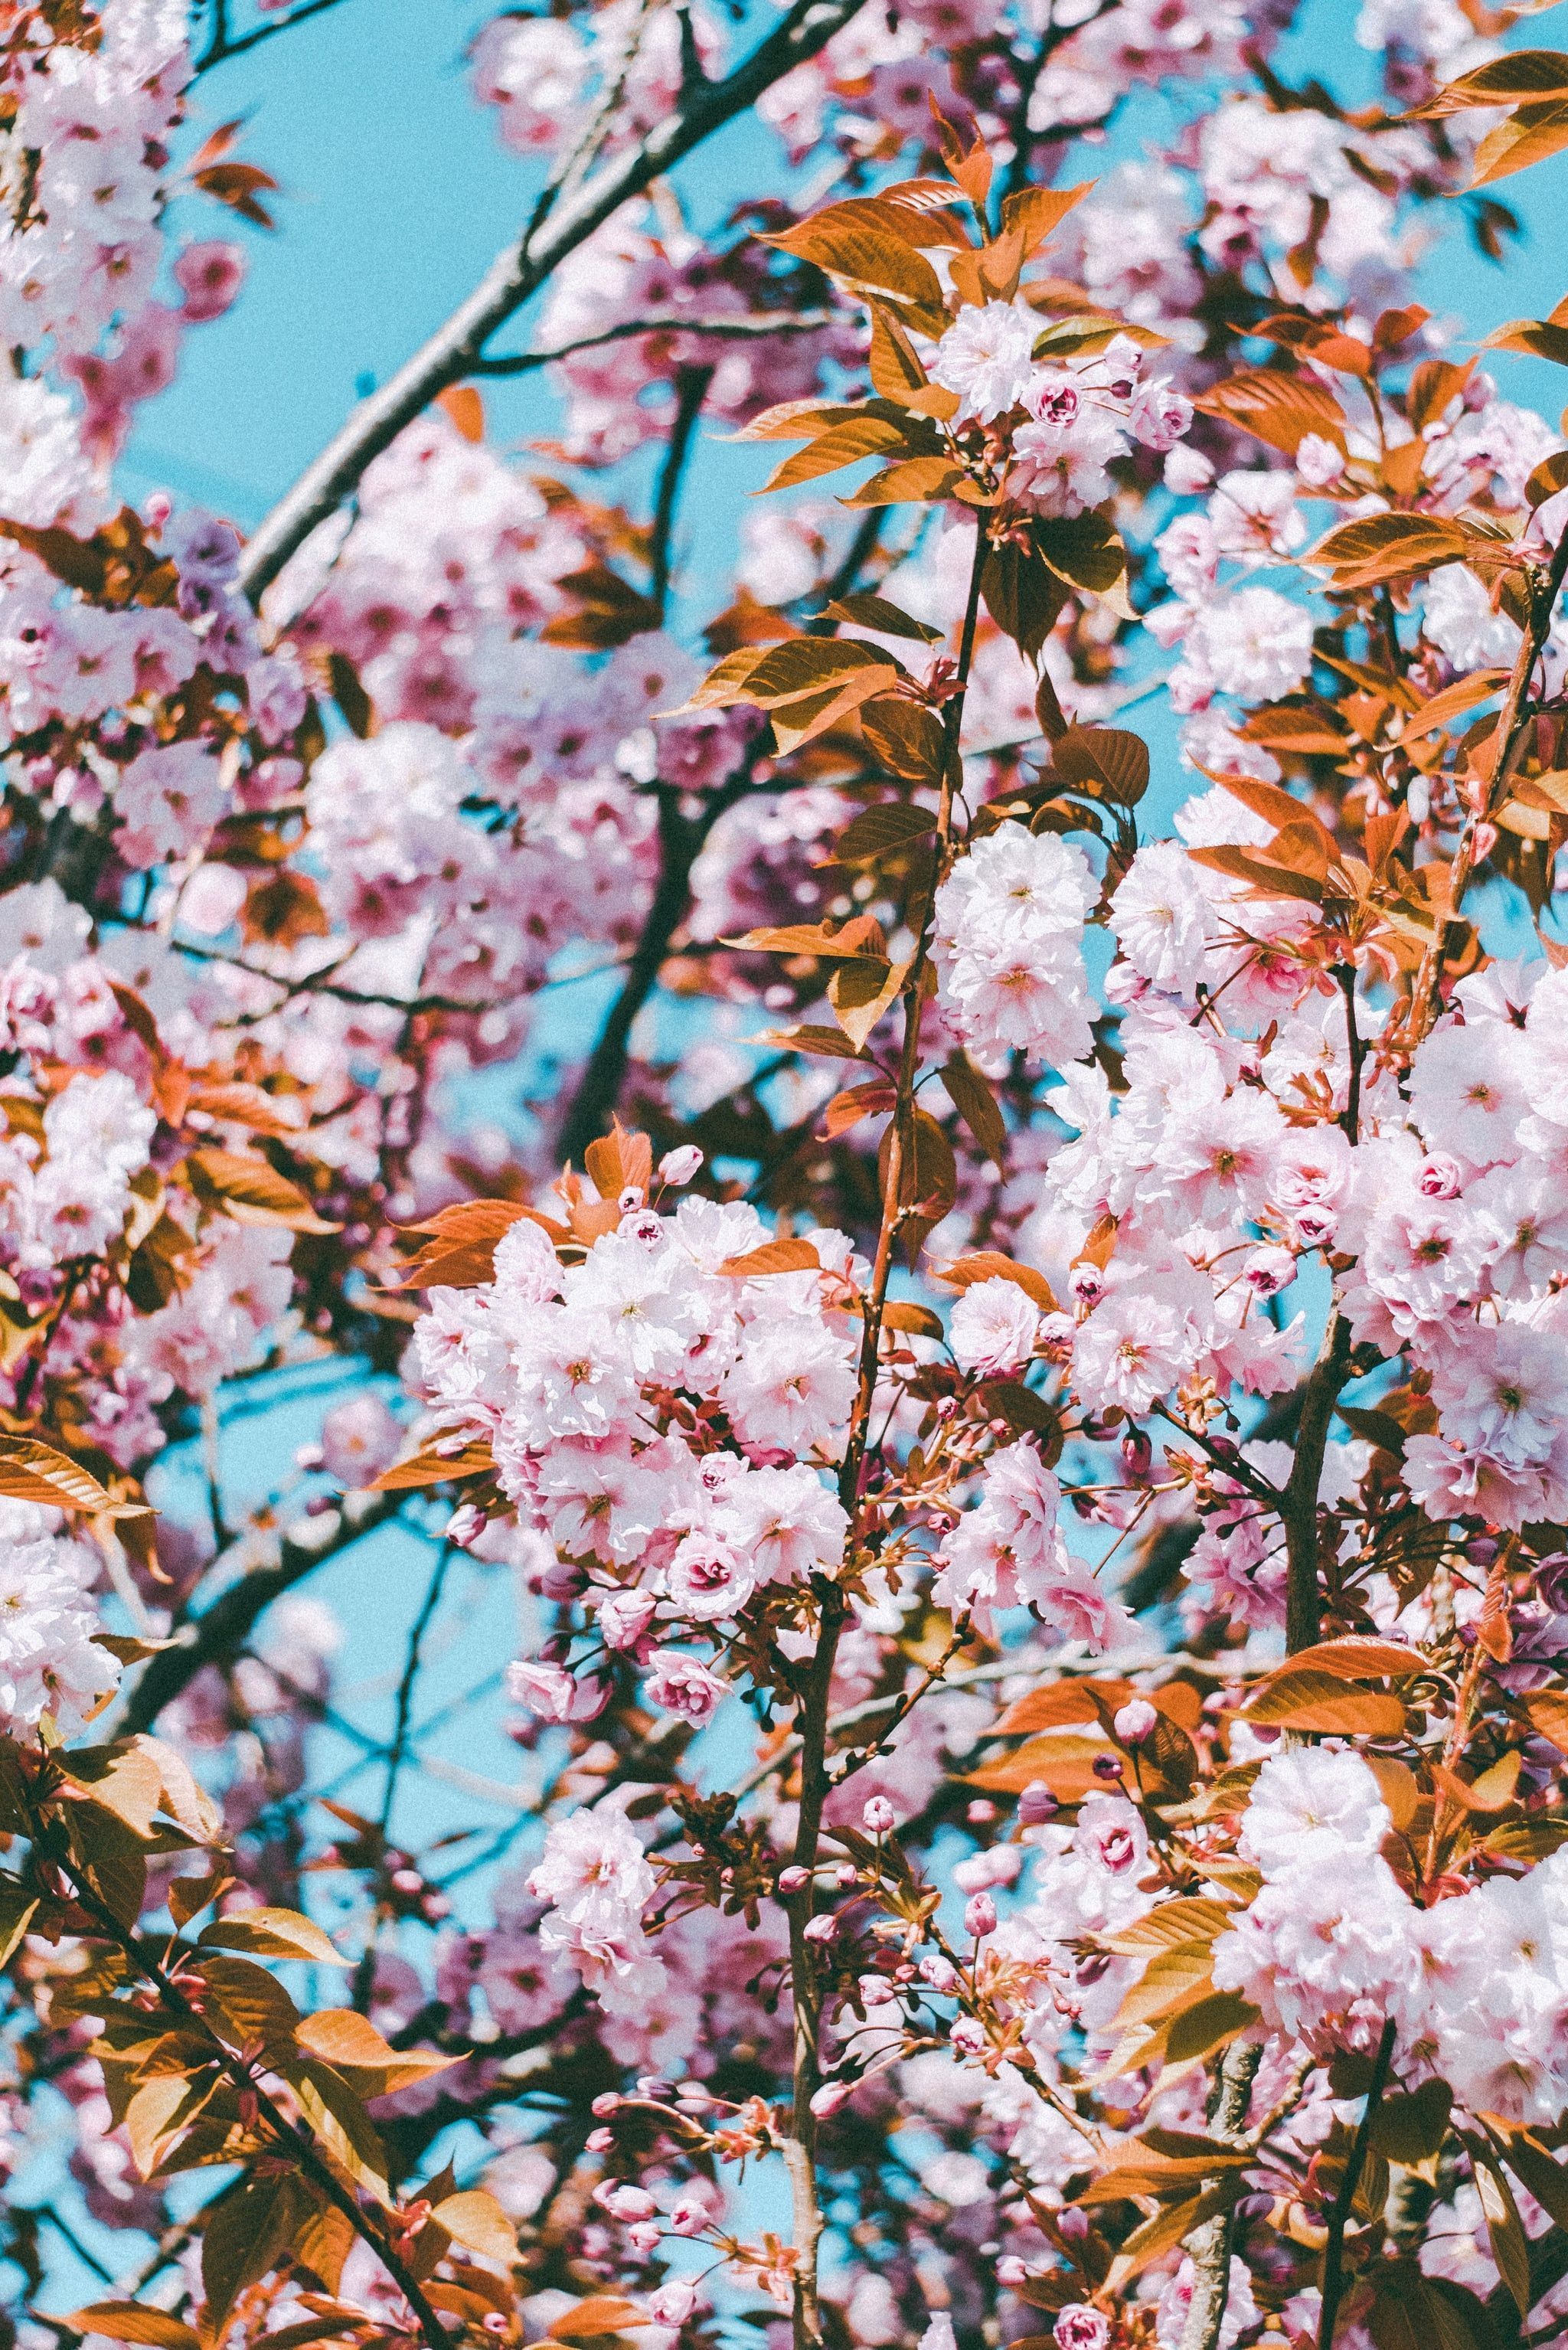 Cherry Blossom iPhone Wallpaper. The Best iOS 14 Wallpaper Ideas That'll Make Your Phone Look Aesthetically Pleasing AF